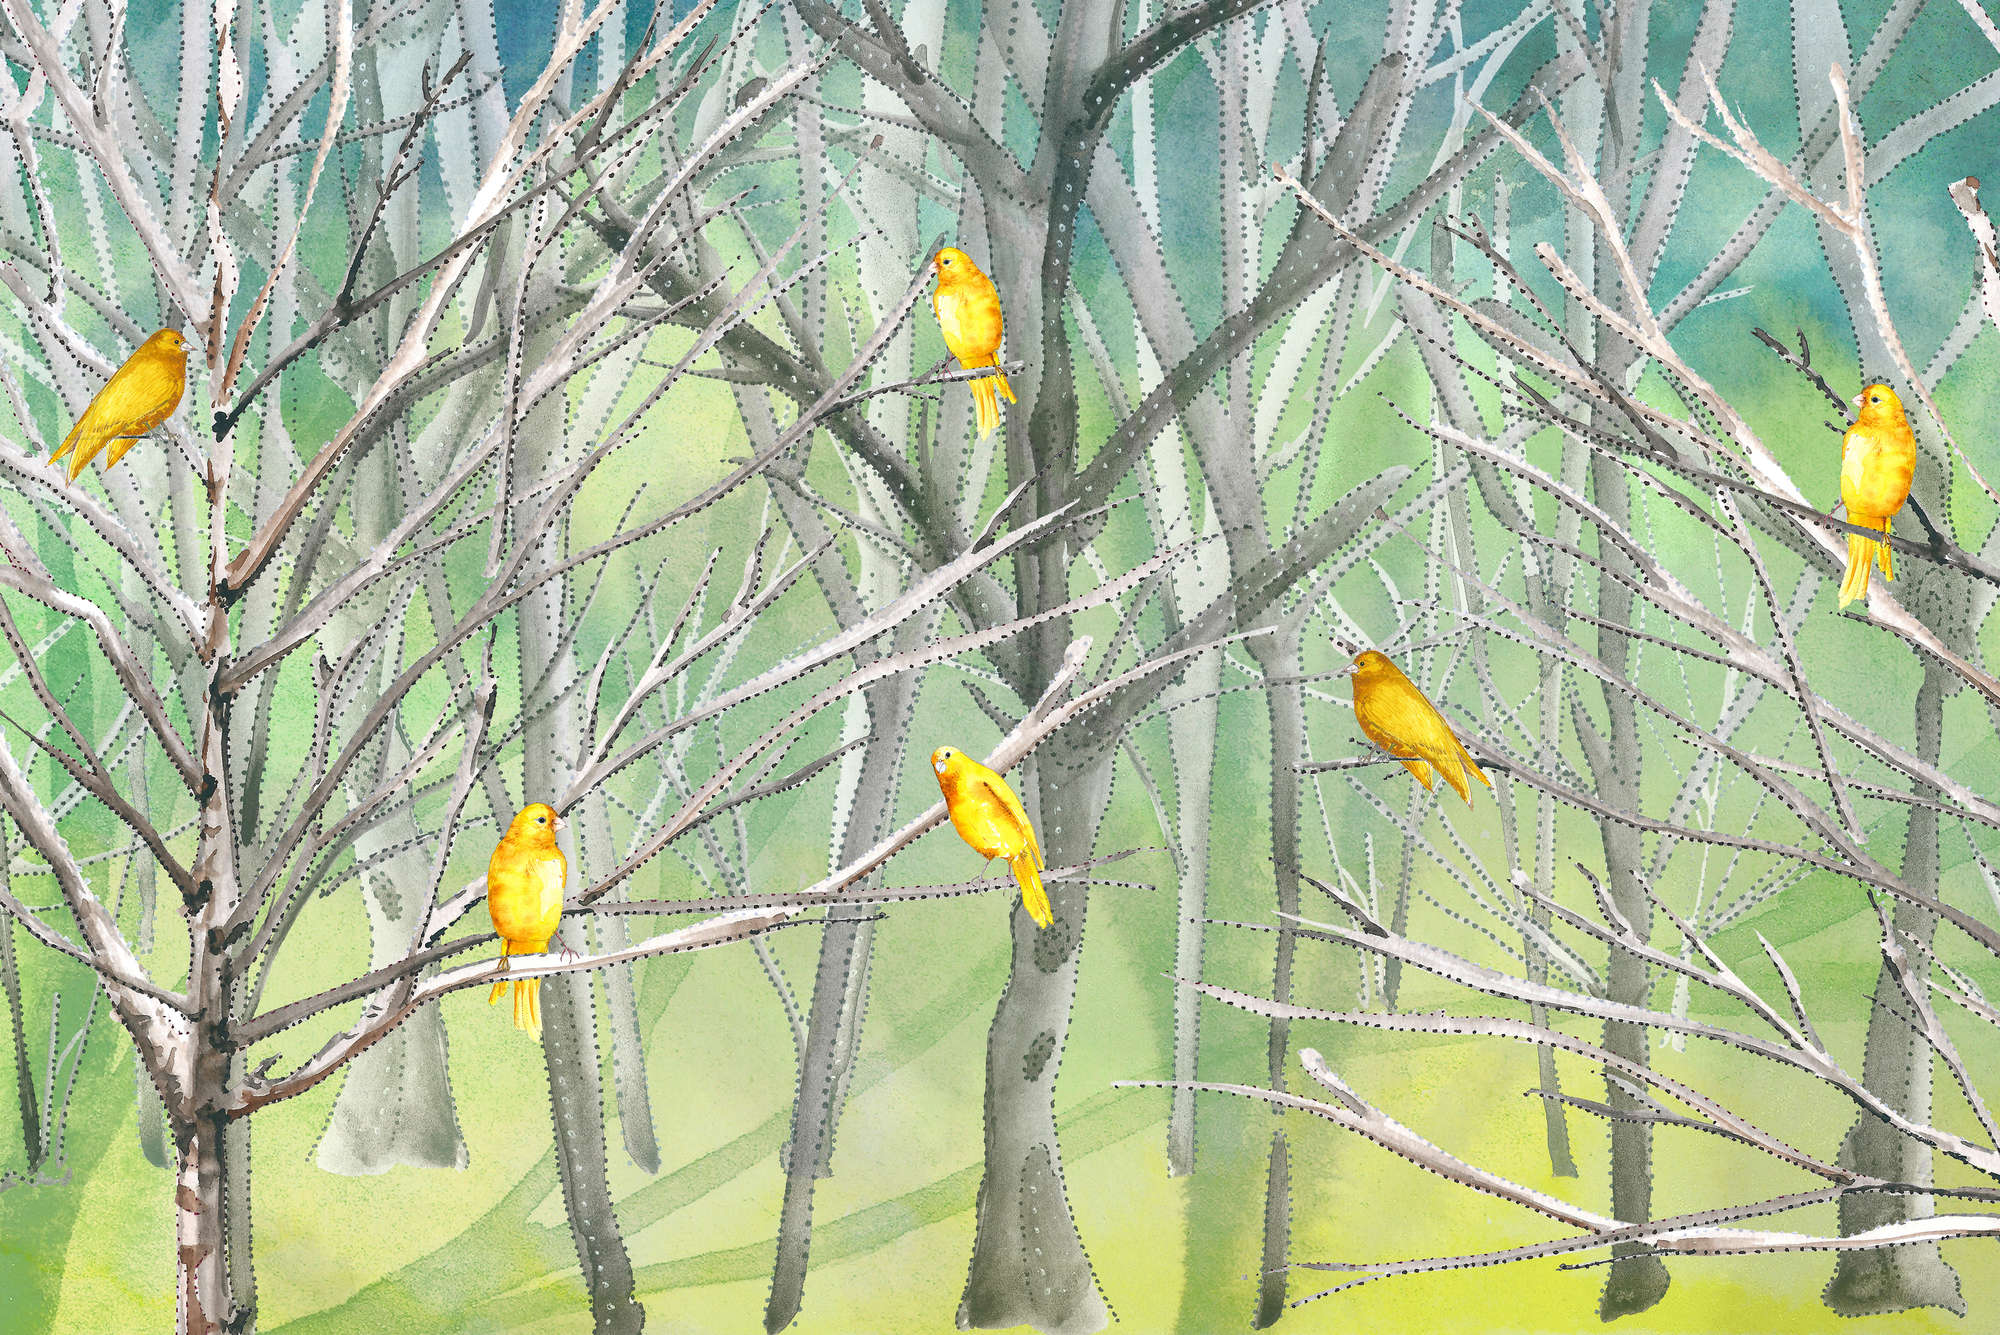             Forest mural with birds in blue and yellow on matt smooth vinyl
        